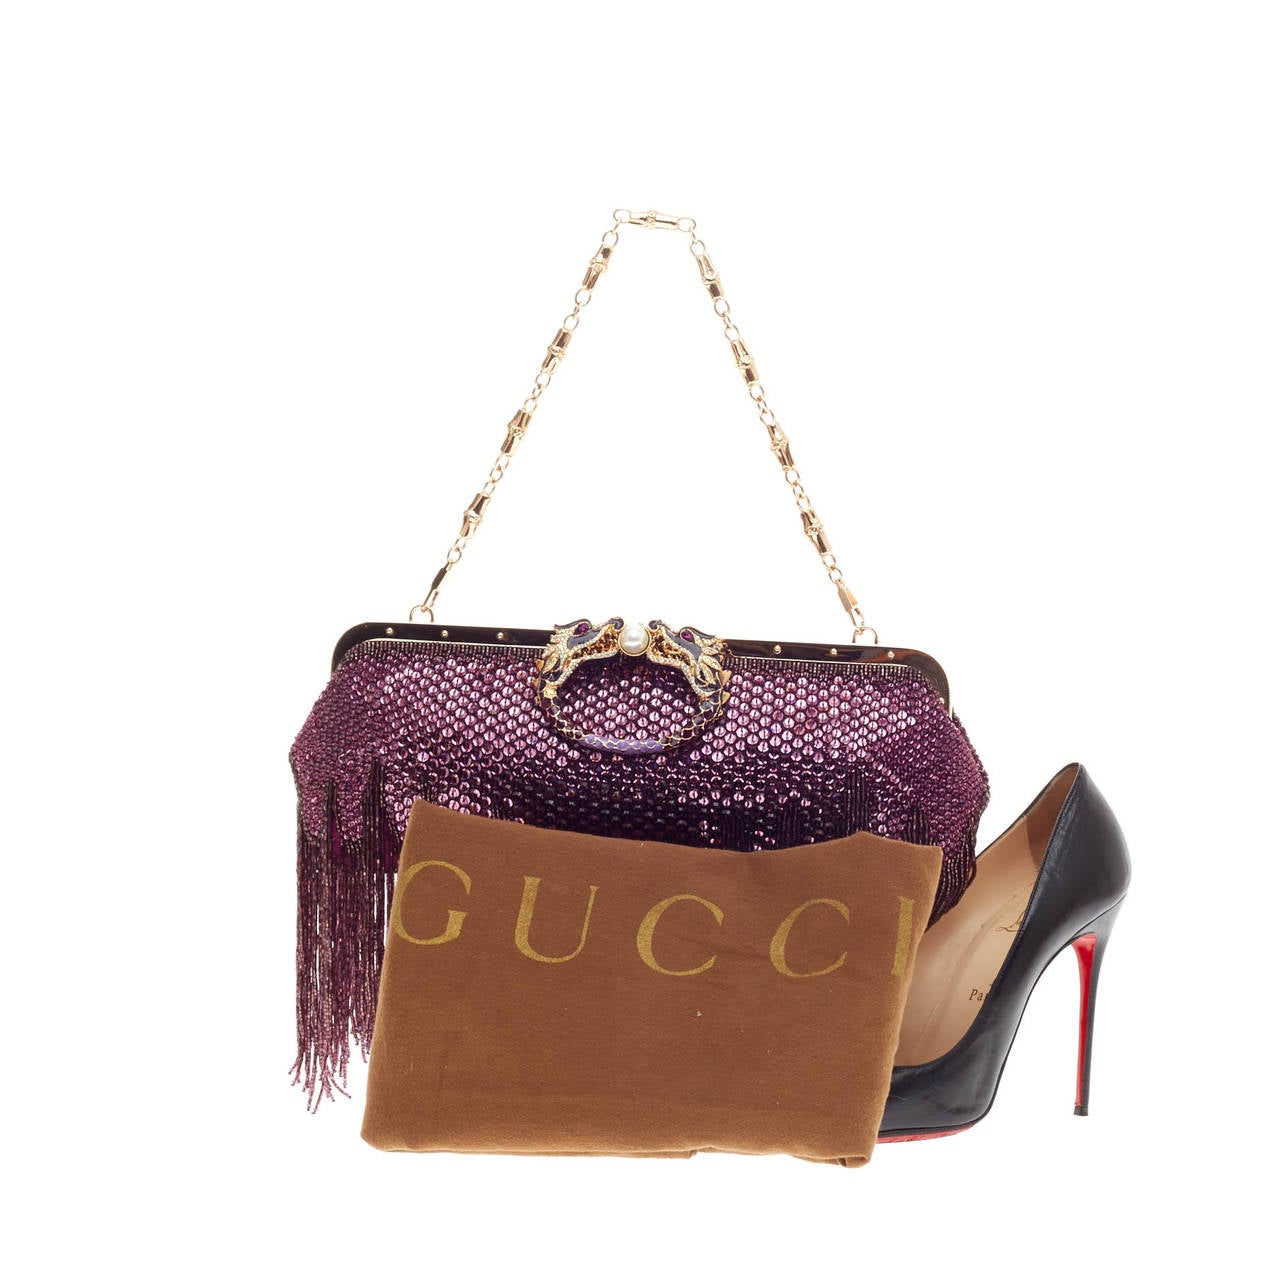 This authentic limited edition Gucci Beaded Fringe Evening Bag Crystal with Dragon Head Closure designed by Tom Ford for the designer's last show is an eye-catching runway accessory perfect for special occasions. Meticulously adorned in purple